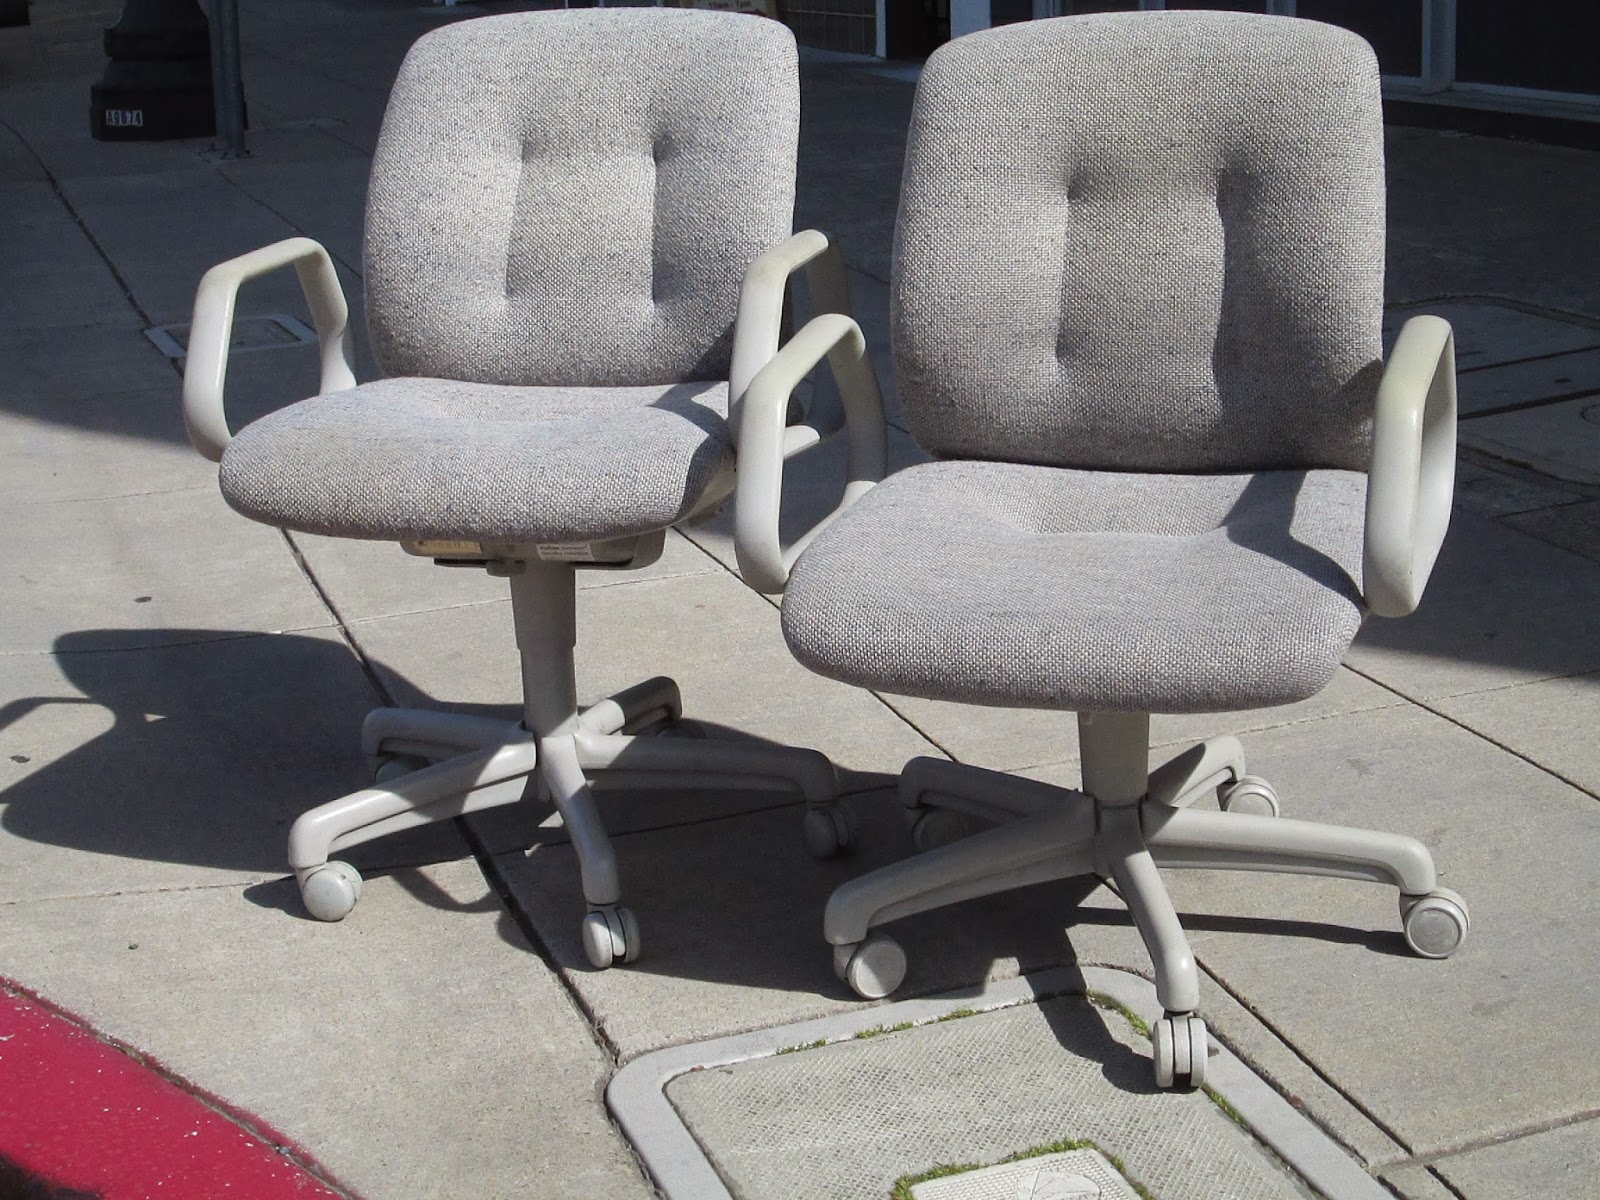 UHURU FURNITURE & COLLECTIBLES: SOLD Inexpensive Office Chairs - $5 each